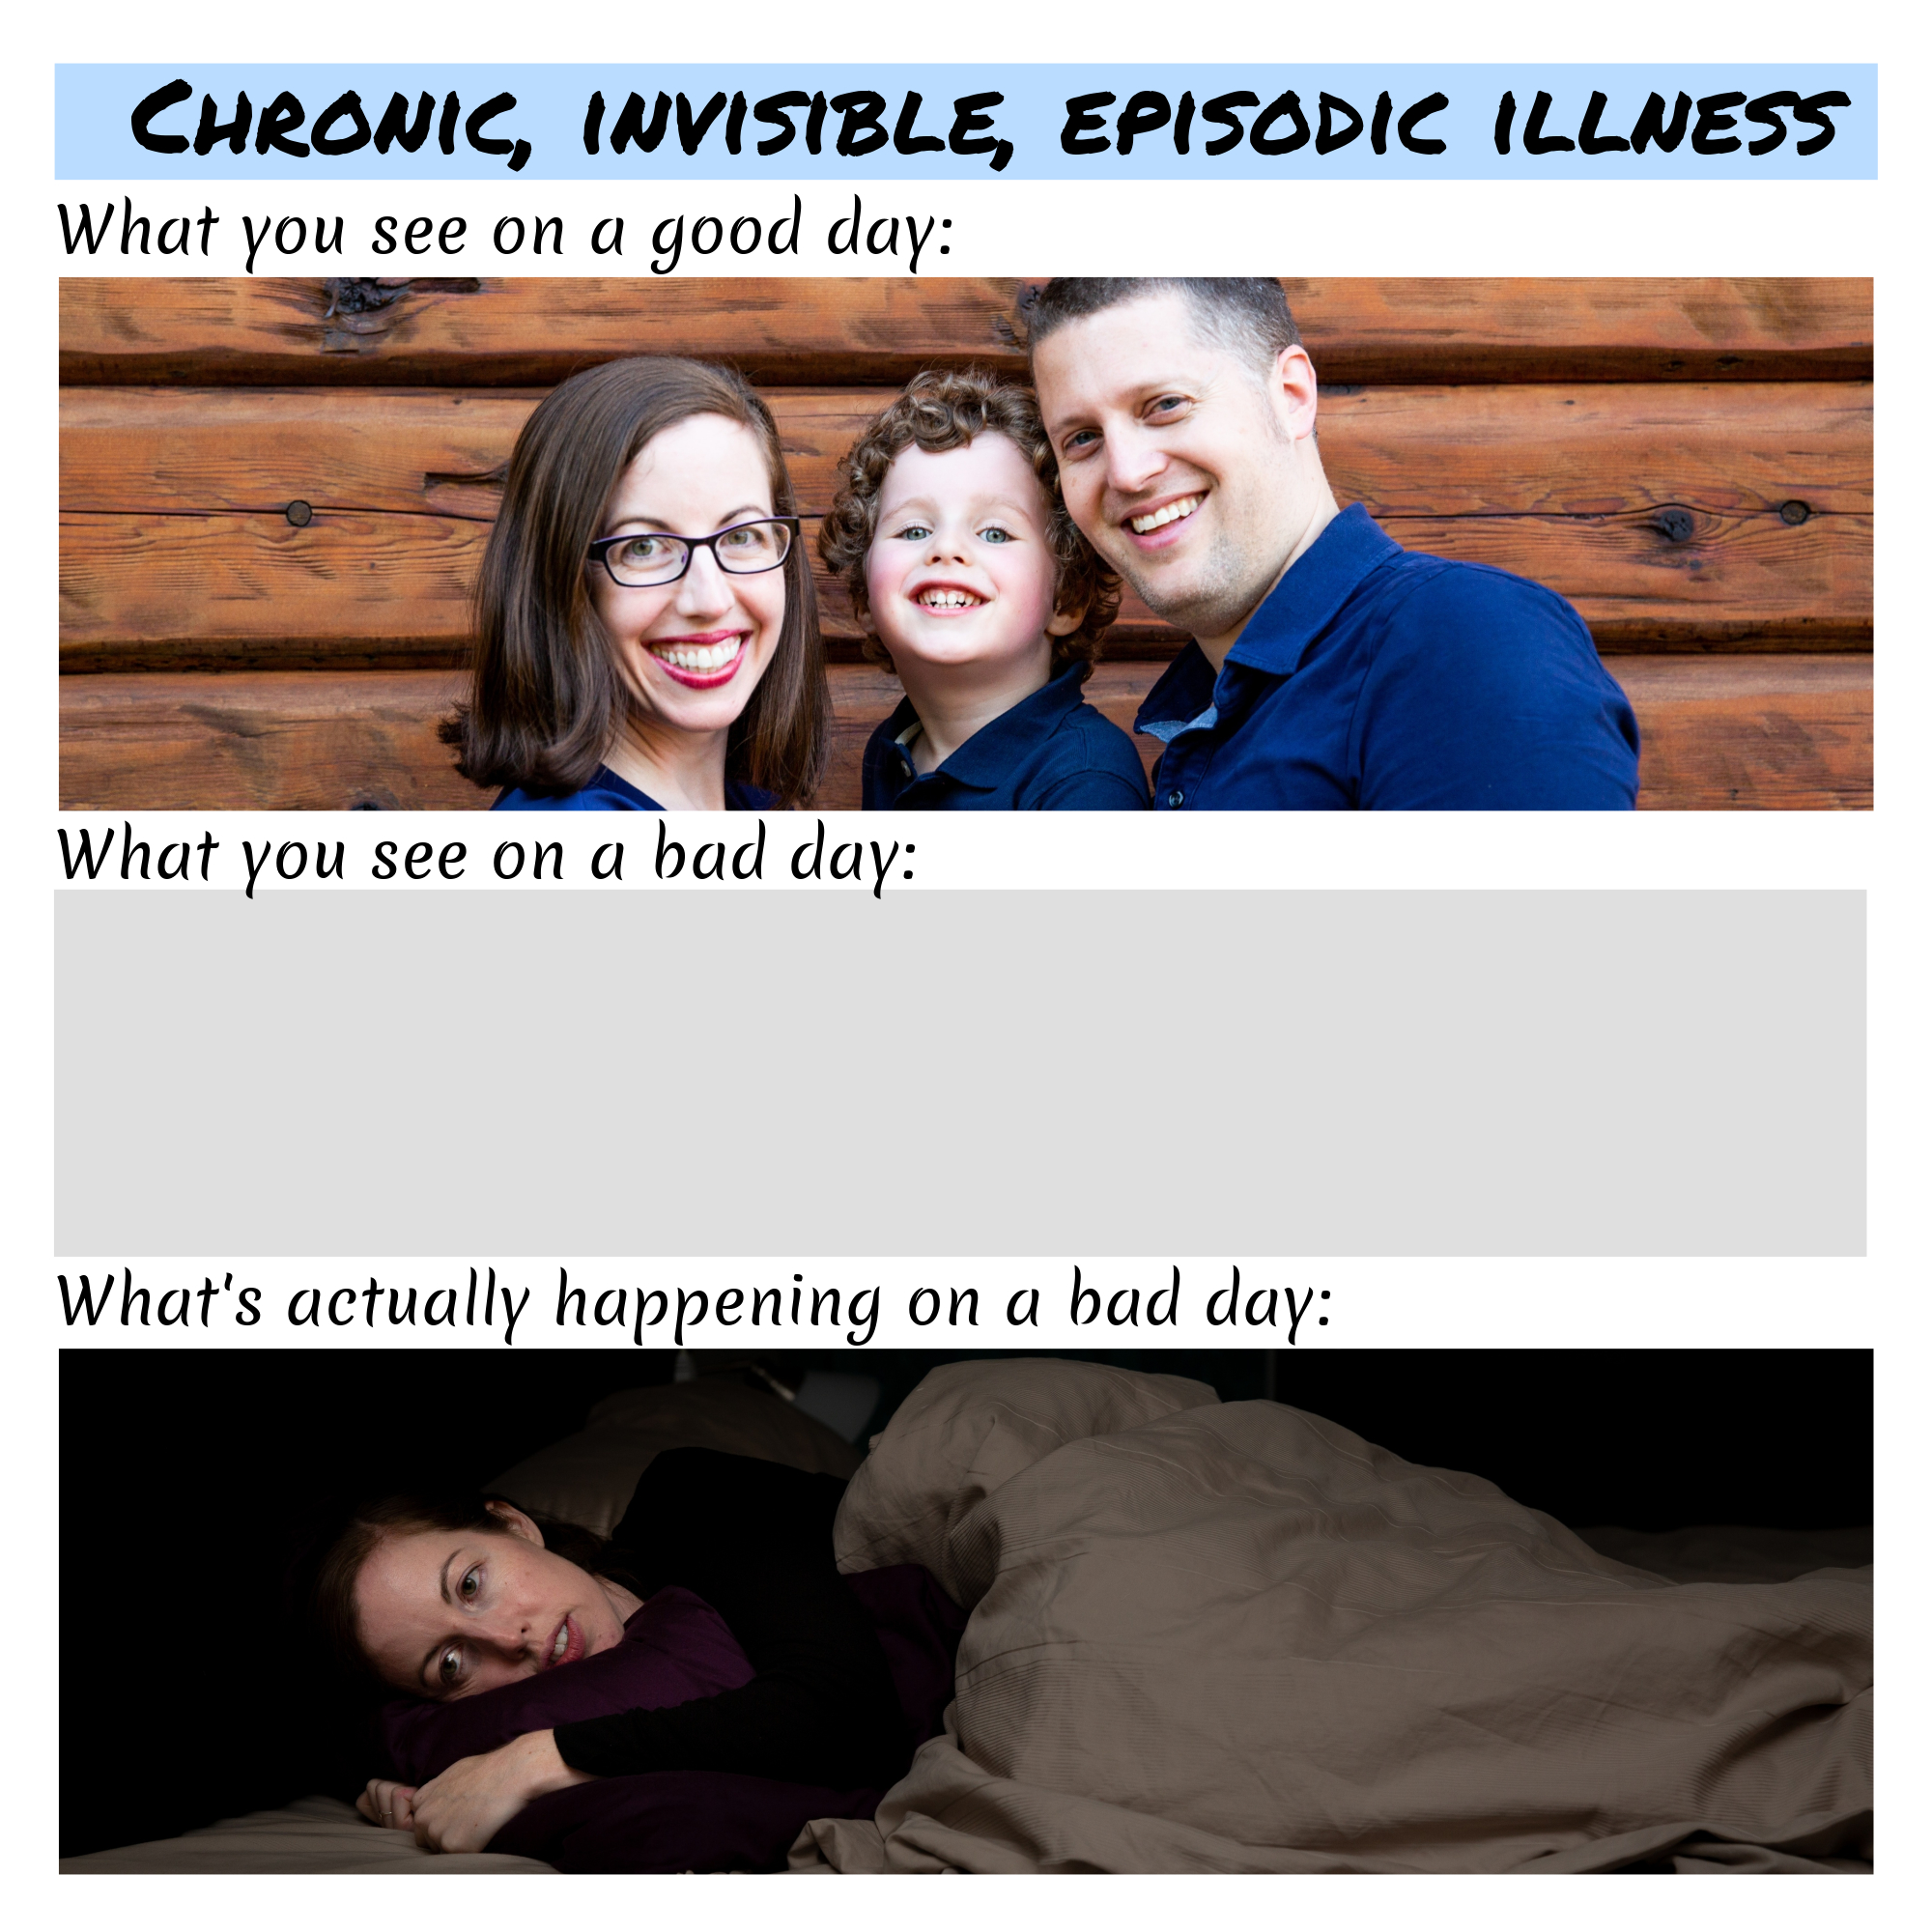 On a good day, you will see my smiling face, as shown by the top photo of myself smiling with my son and husband. The middle photo has the caption, "What you see on a bad day" and it's blank. The bottom photo says "what's actually happening on a bad day" and it shows me laying down in bed, grimacing in pain.